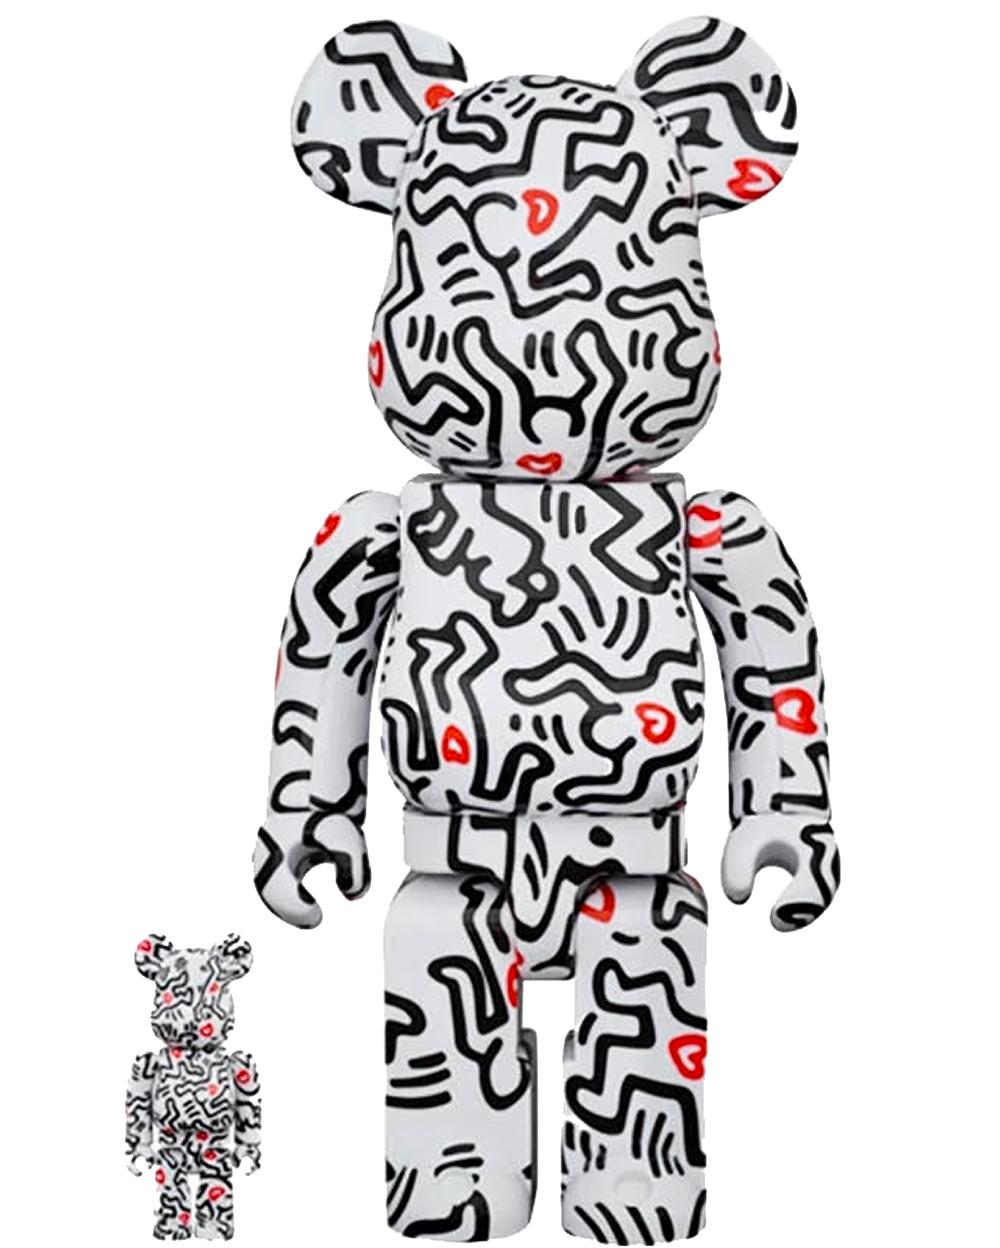 Keith Haring Bearbrick 400%  (Keith Haring BE@RBRICK)  - Print by (after) Keith Haring